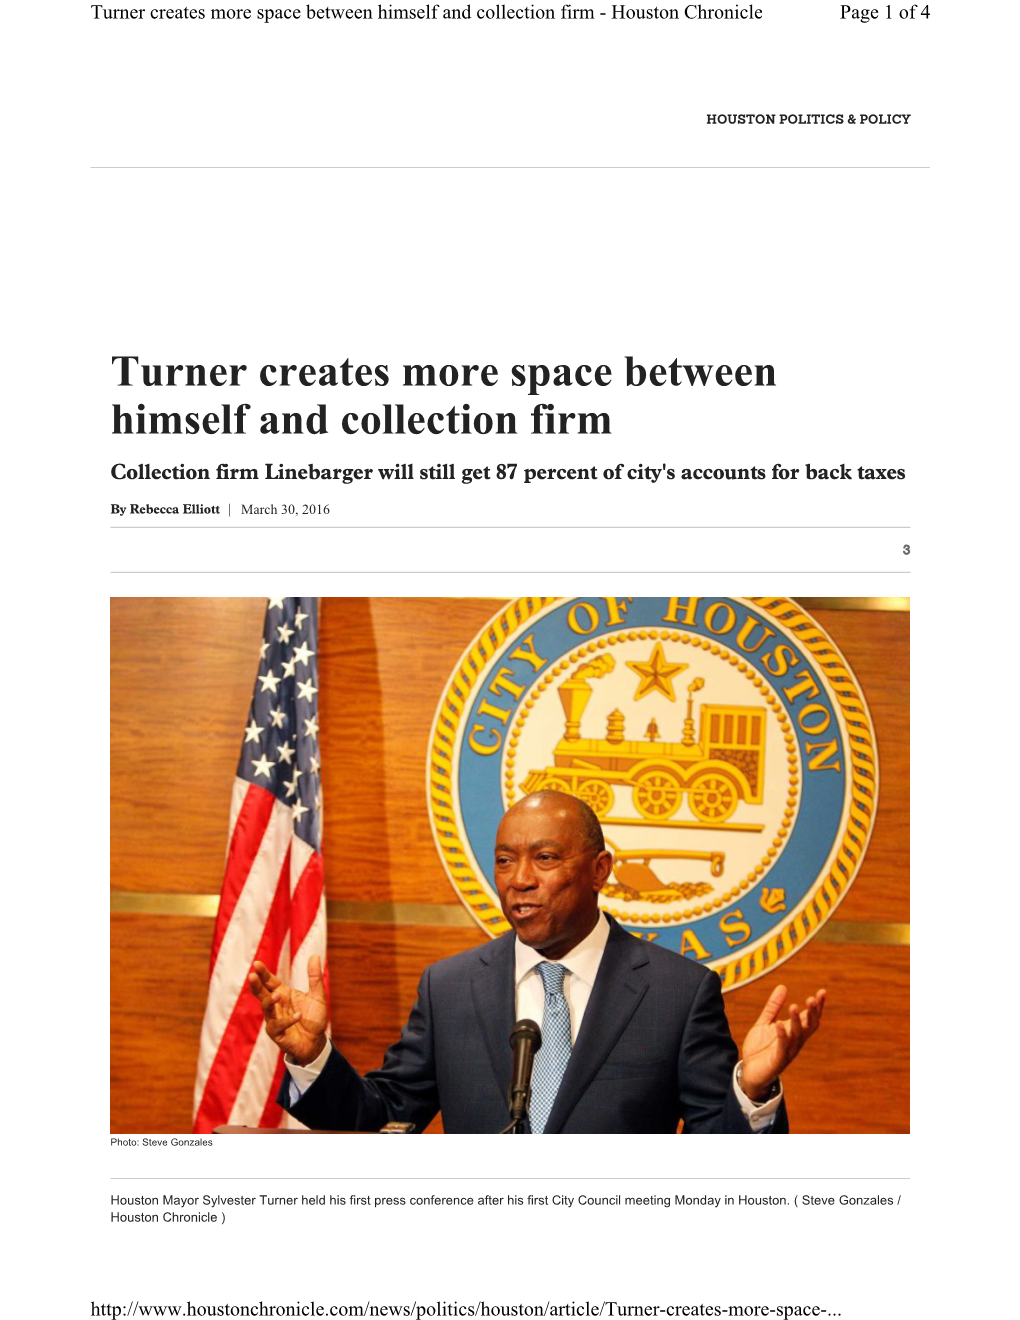 Turner Creates More Space Between Himself and Collection Firm - Houston Chronicle Page 1 of 4